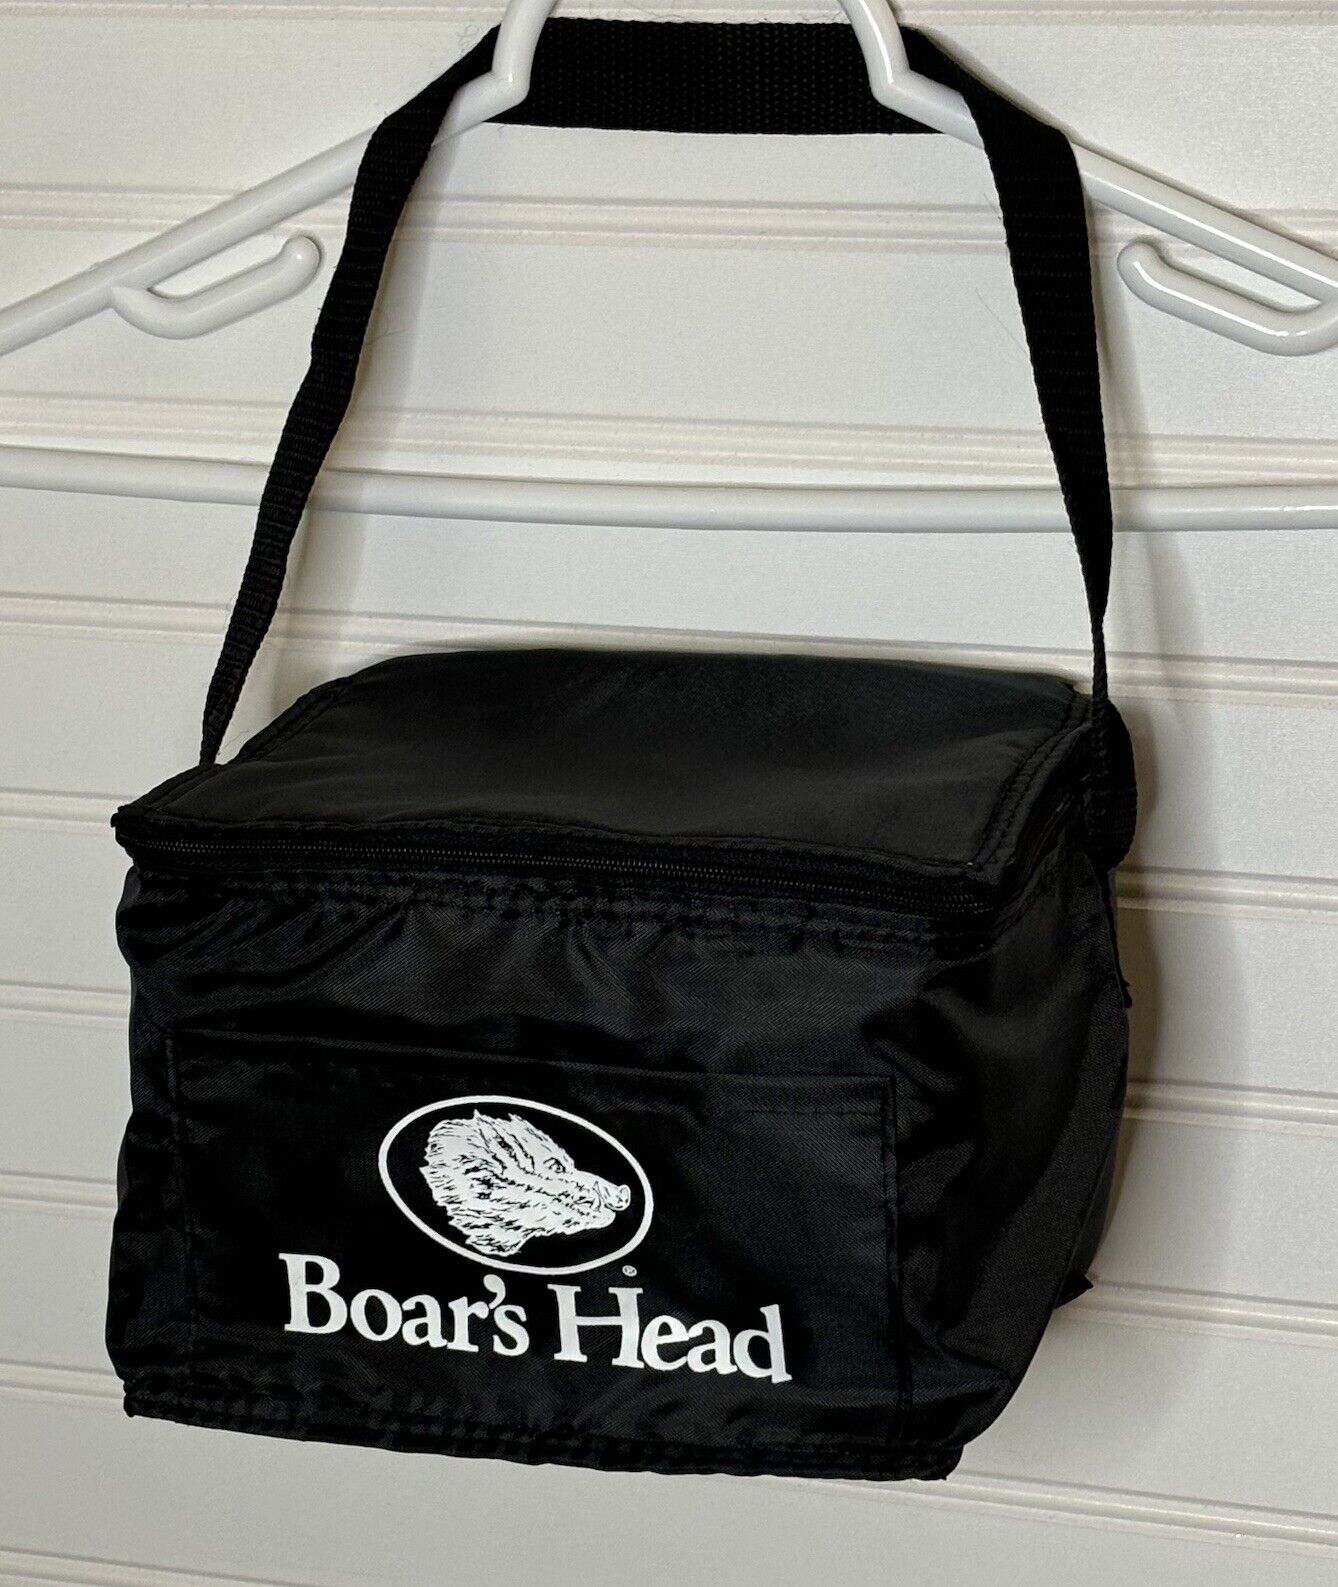 Vintage Boars Head Insulated Black Lunchbox Tote Bag Strap Cooler Collectible